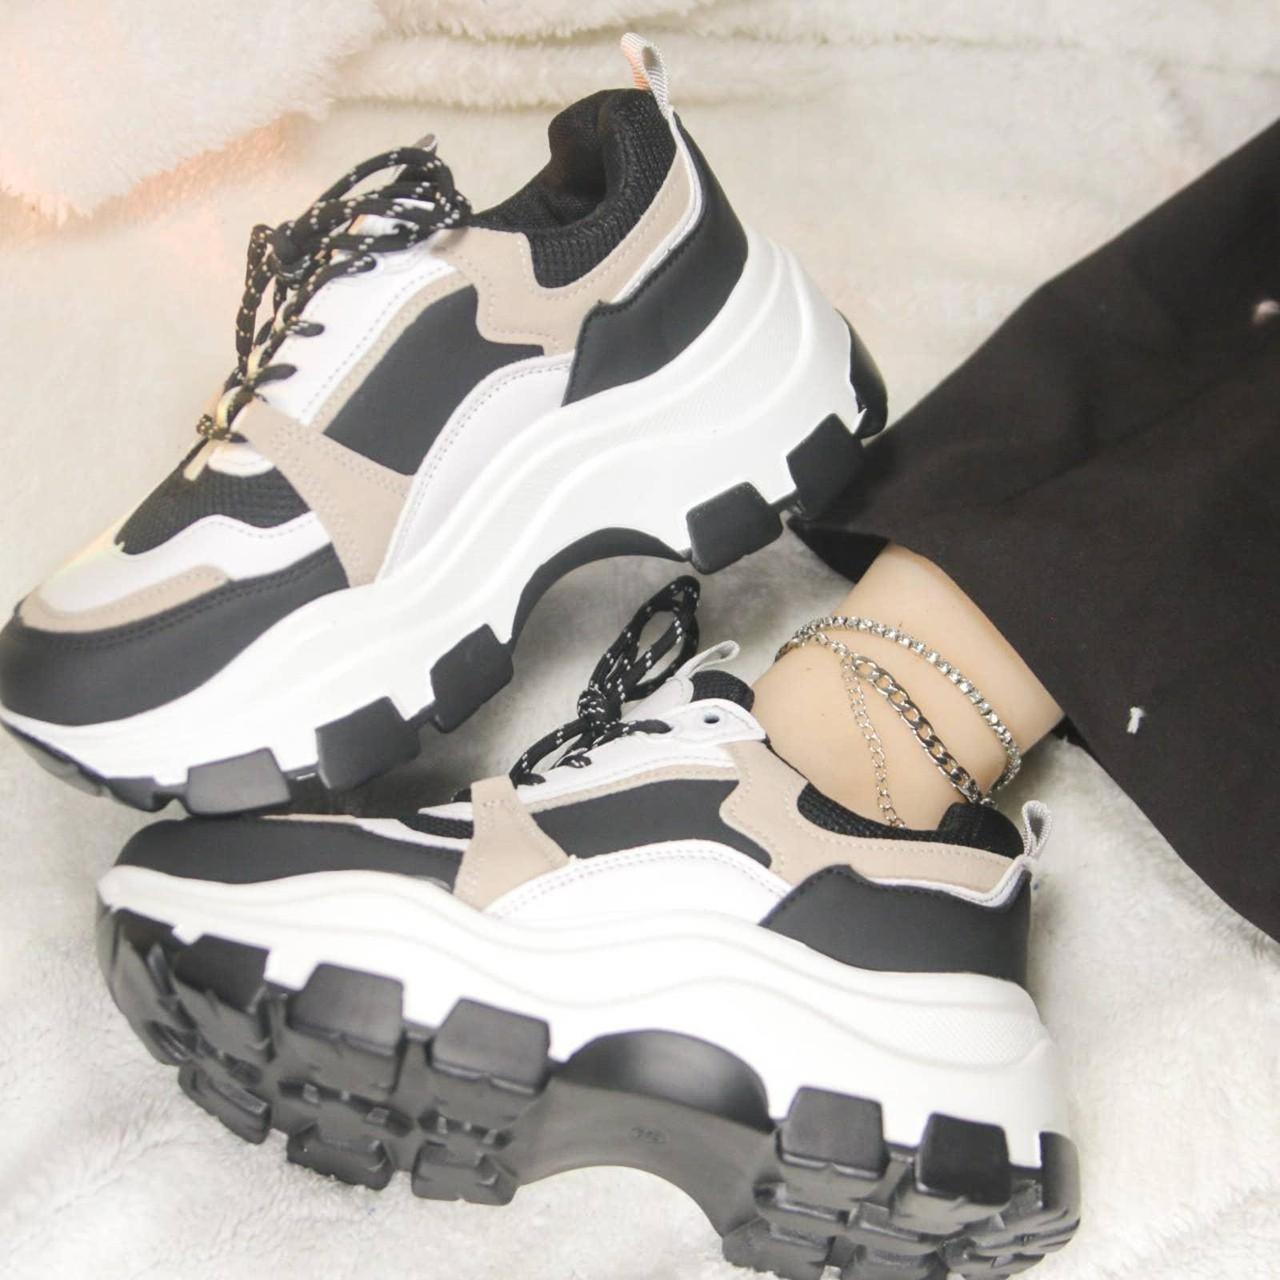 Product Image 4 - Name: Chunky Womens Platform Sneakers